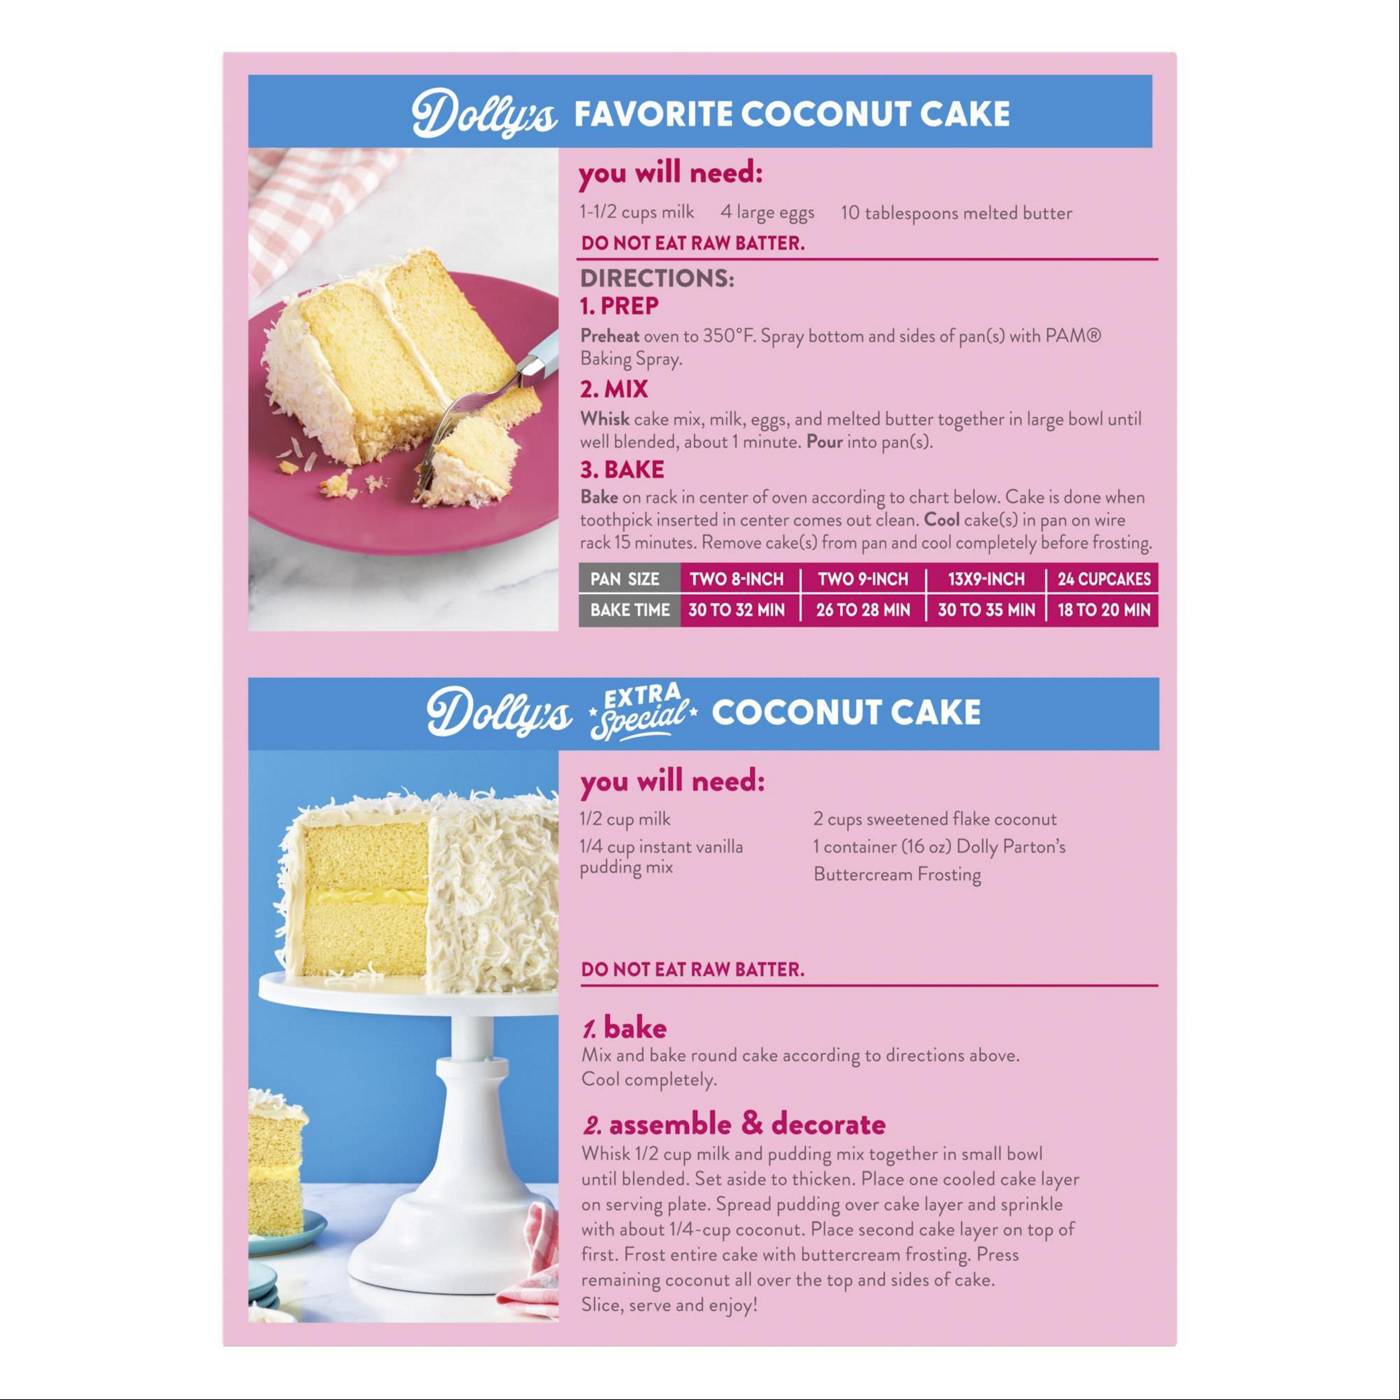 Duncan Hines Dolly Parton's Favorite Coconut Cake Mix; image 3 of 4